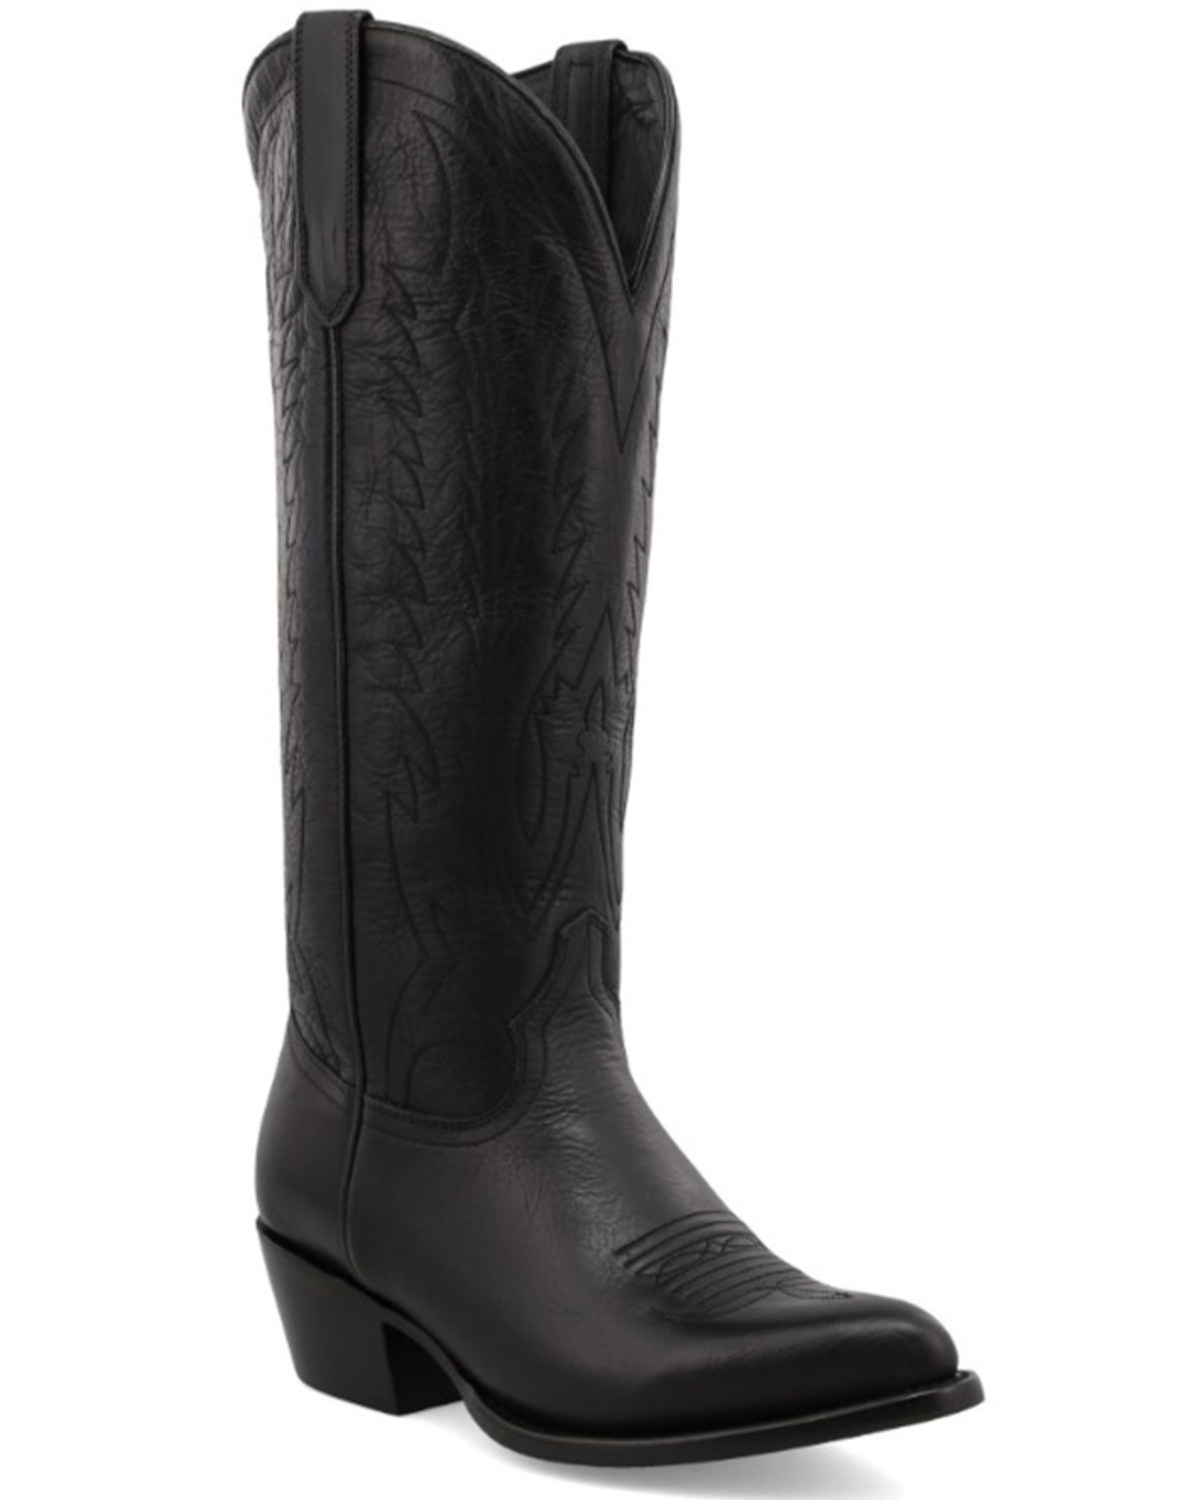 Black Star Women's Eden Stitched Onyx Western Boot - Pointed Toe